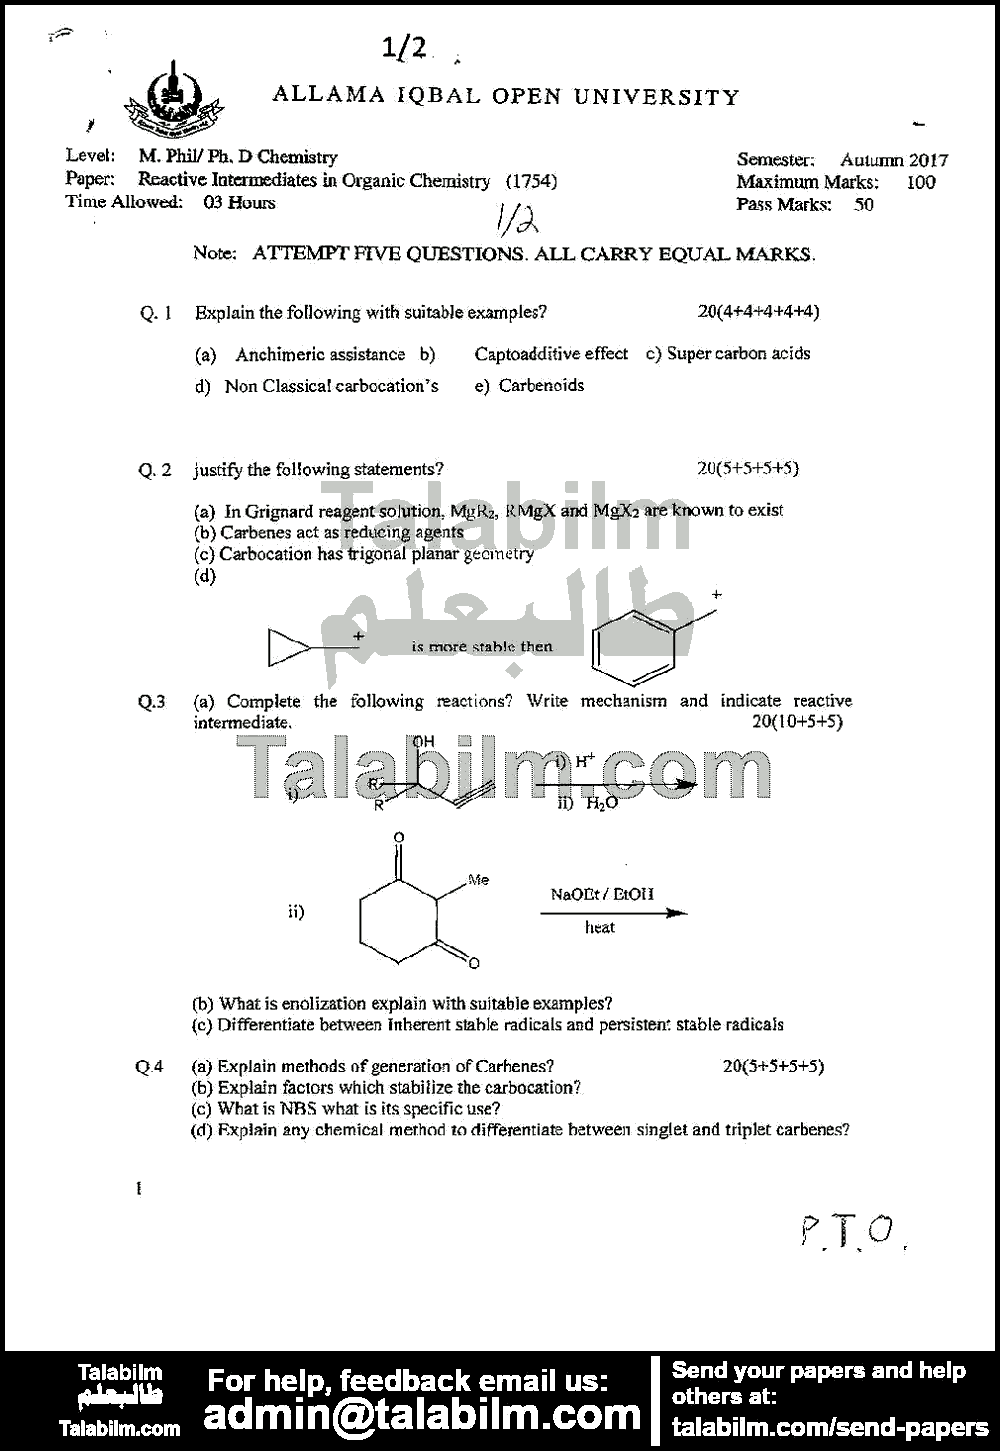 Reactive intermediates in Organic Chemistry 1754 past paper for Autumn 2017